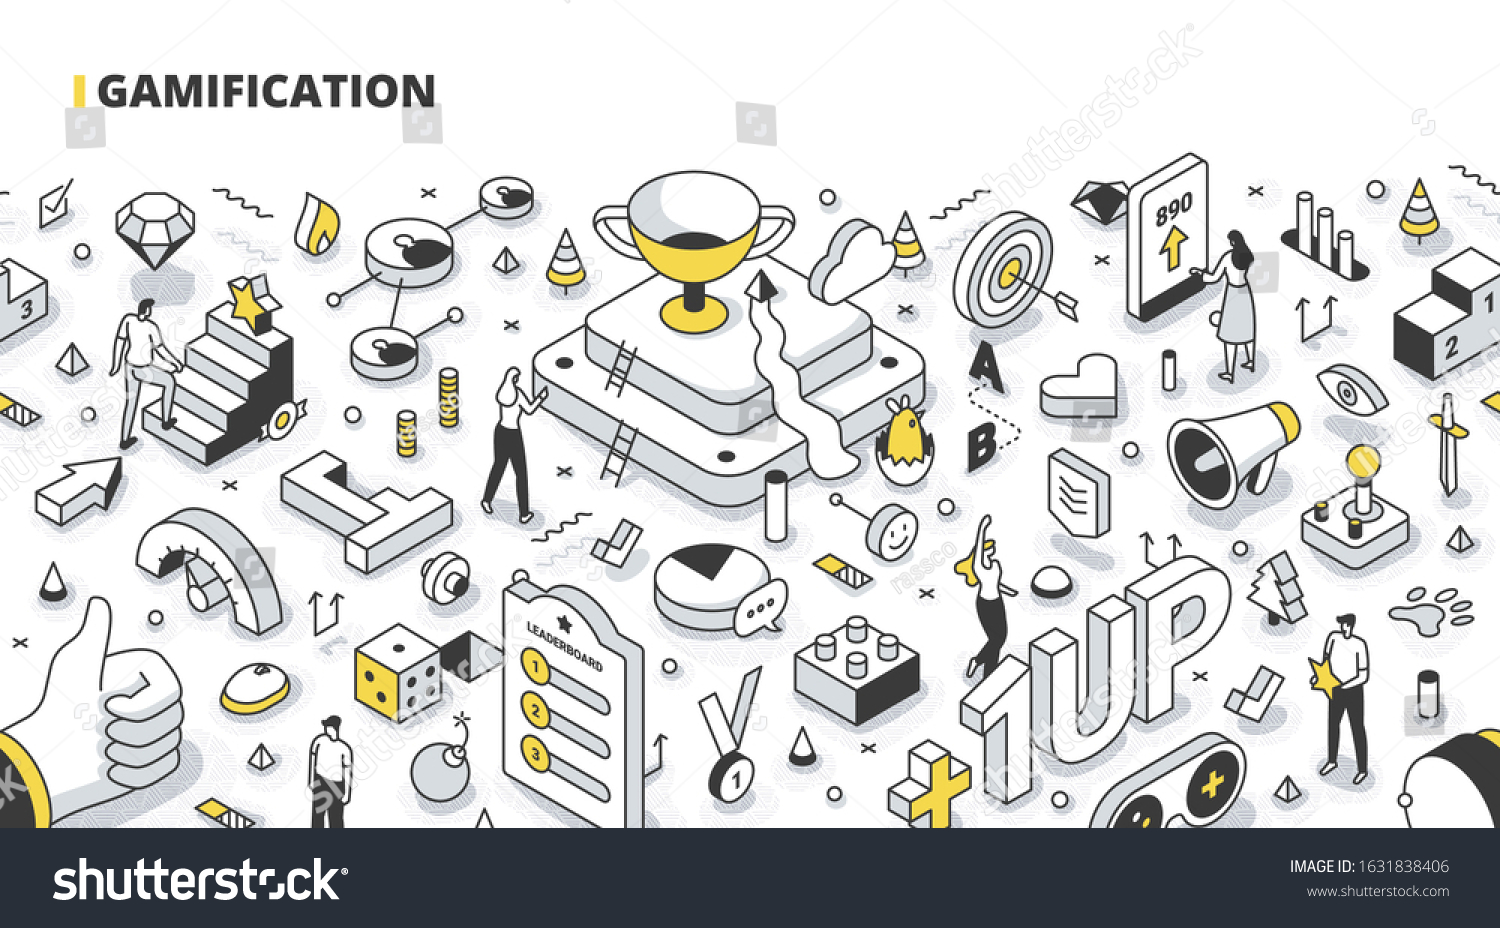 SVG of Gamification concept. Game-like elements in business, education & marketing. Create interactive content to engage customers. Social media marketing technology. Isometric outline illustration svg